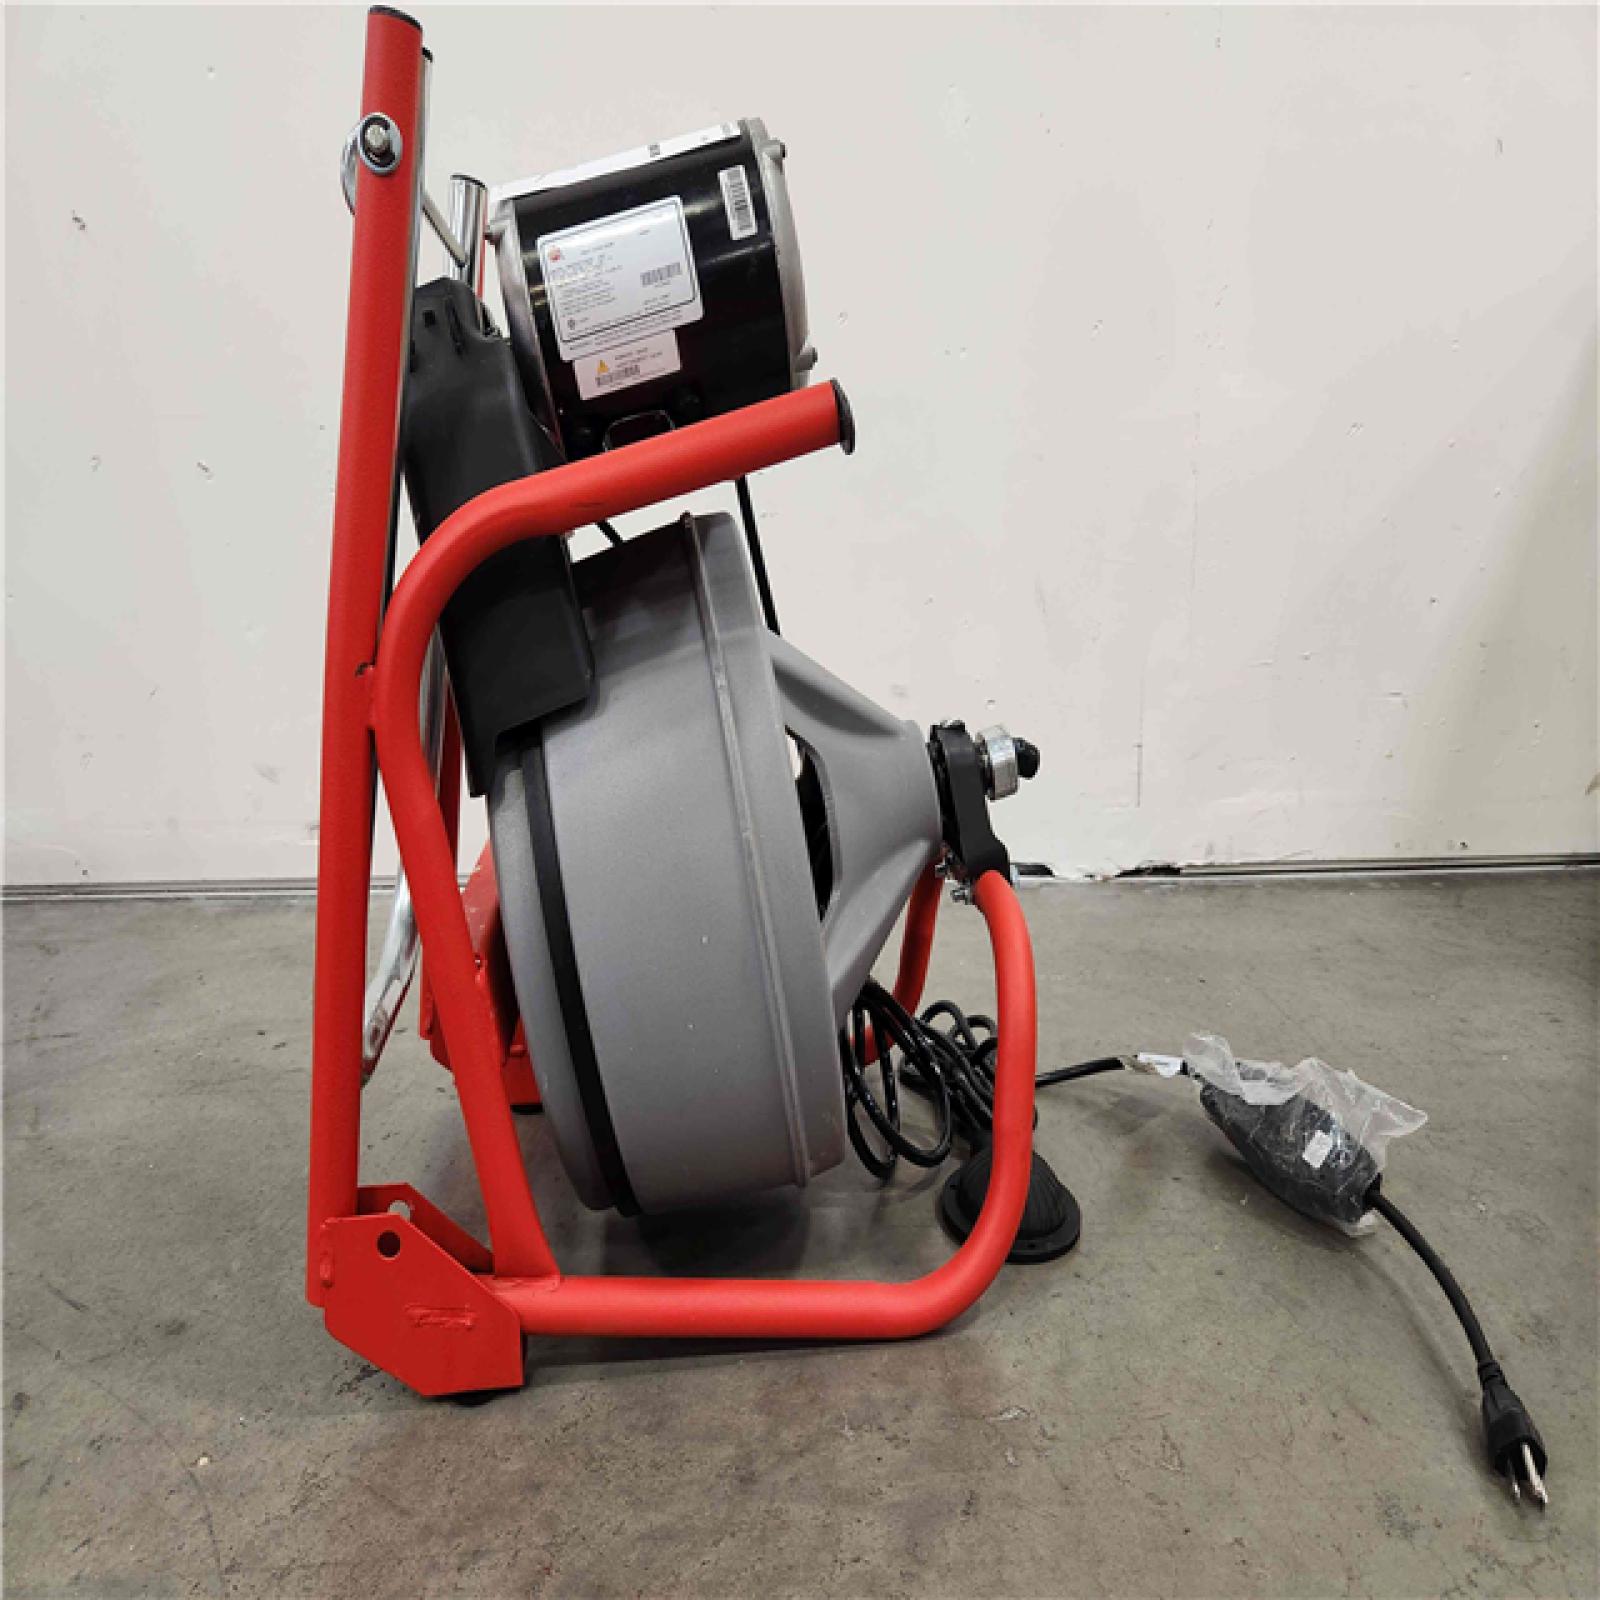 Phoenix Location RIDGID K-400 Drain Cleaning Snake Auger 120-Volt Drum Machine with C-32IW 3/8 in. x 75 ft. Cable